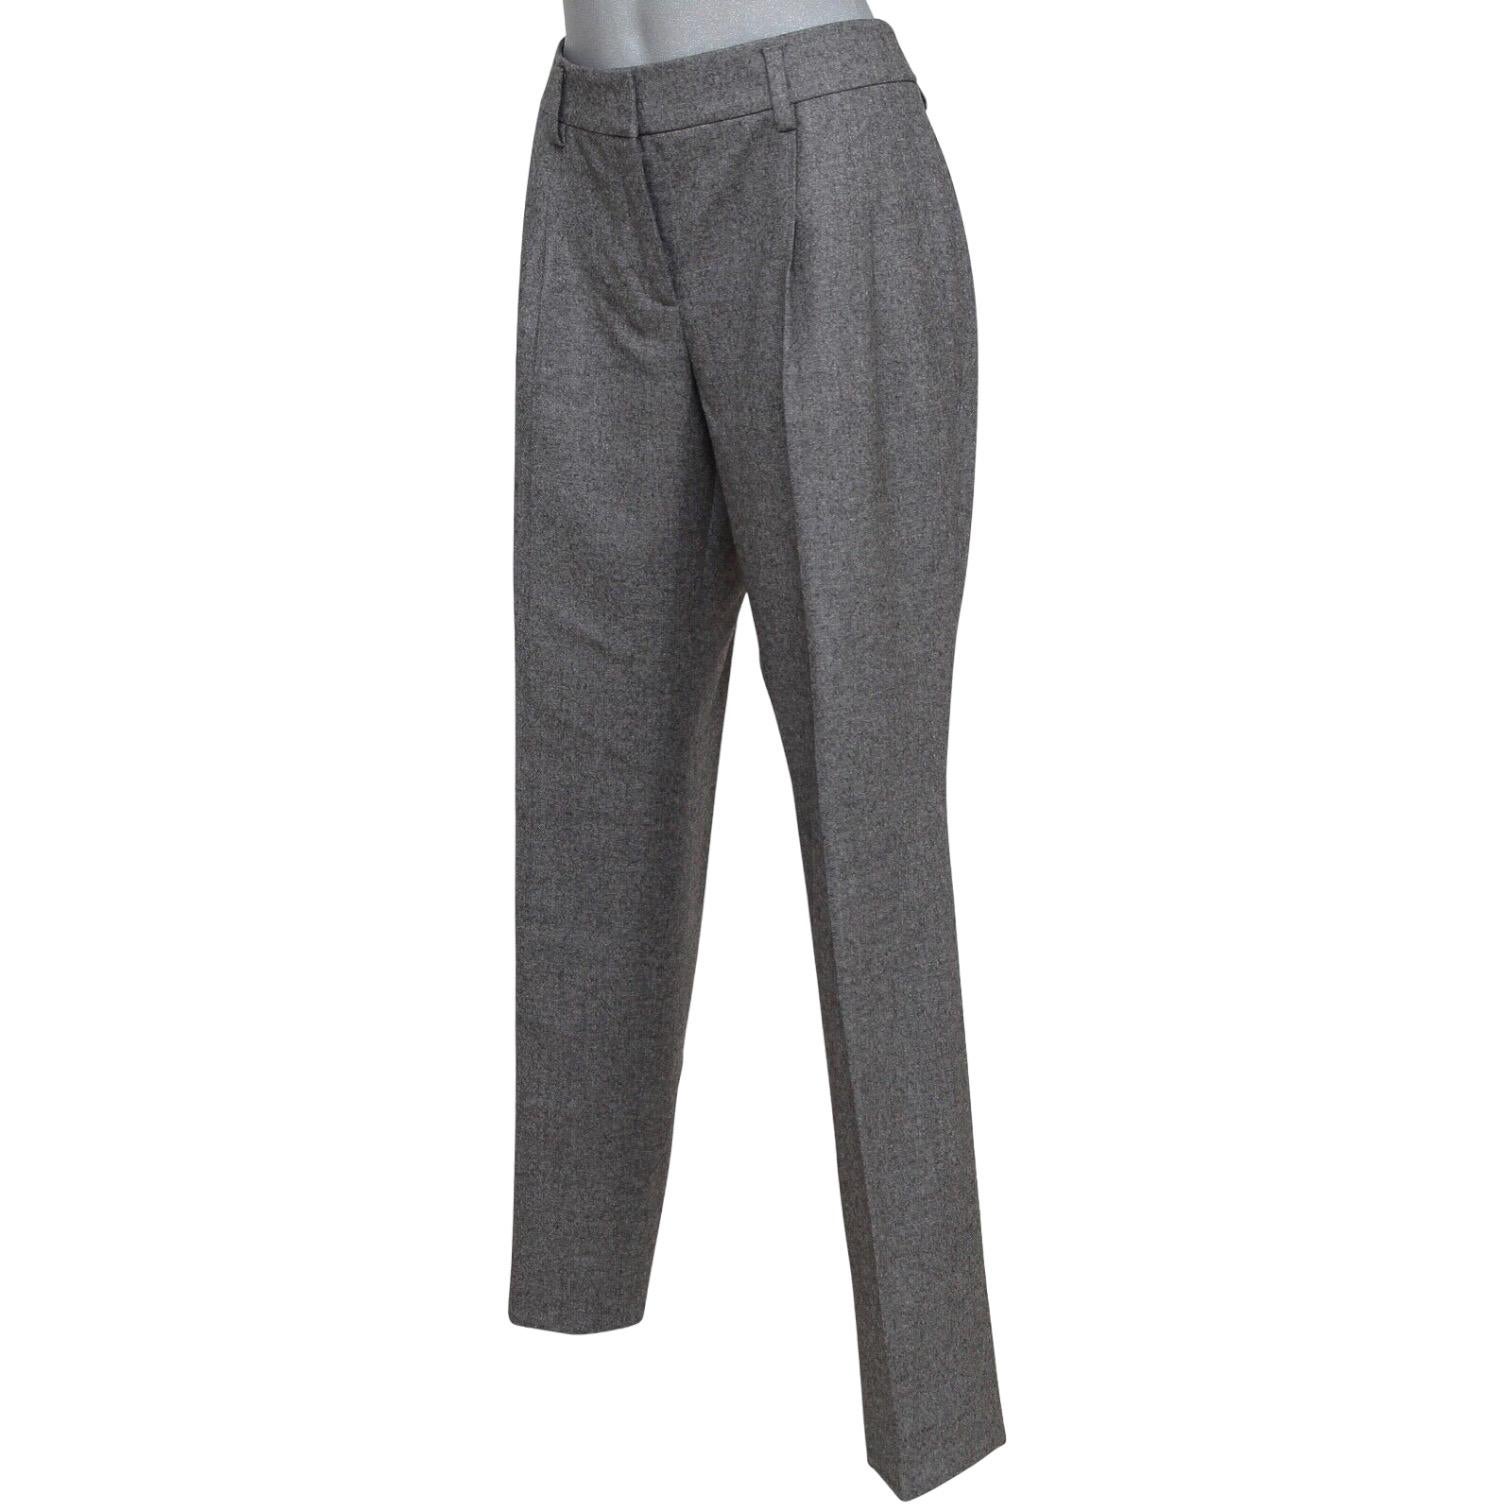 AKRIS PUNTO Grey Pants Straight Leg Wool Pleated Pockets Zipper Sz US 10 F 42 In Good Condition For Sale In Hollywood, FL